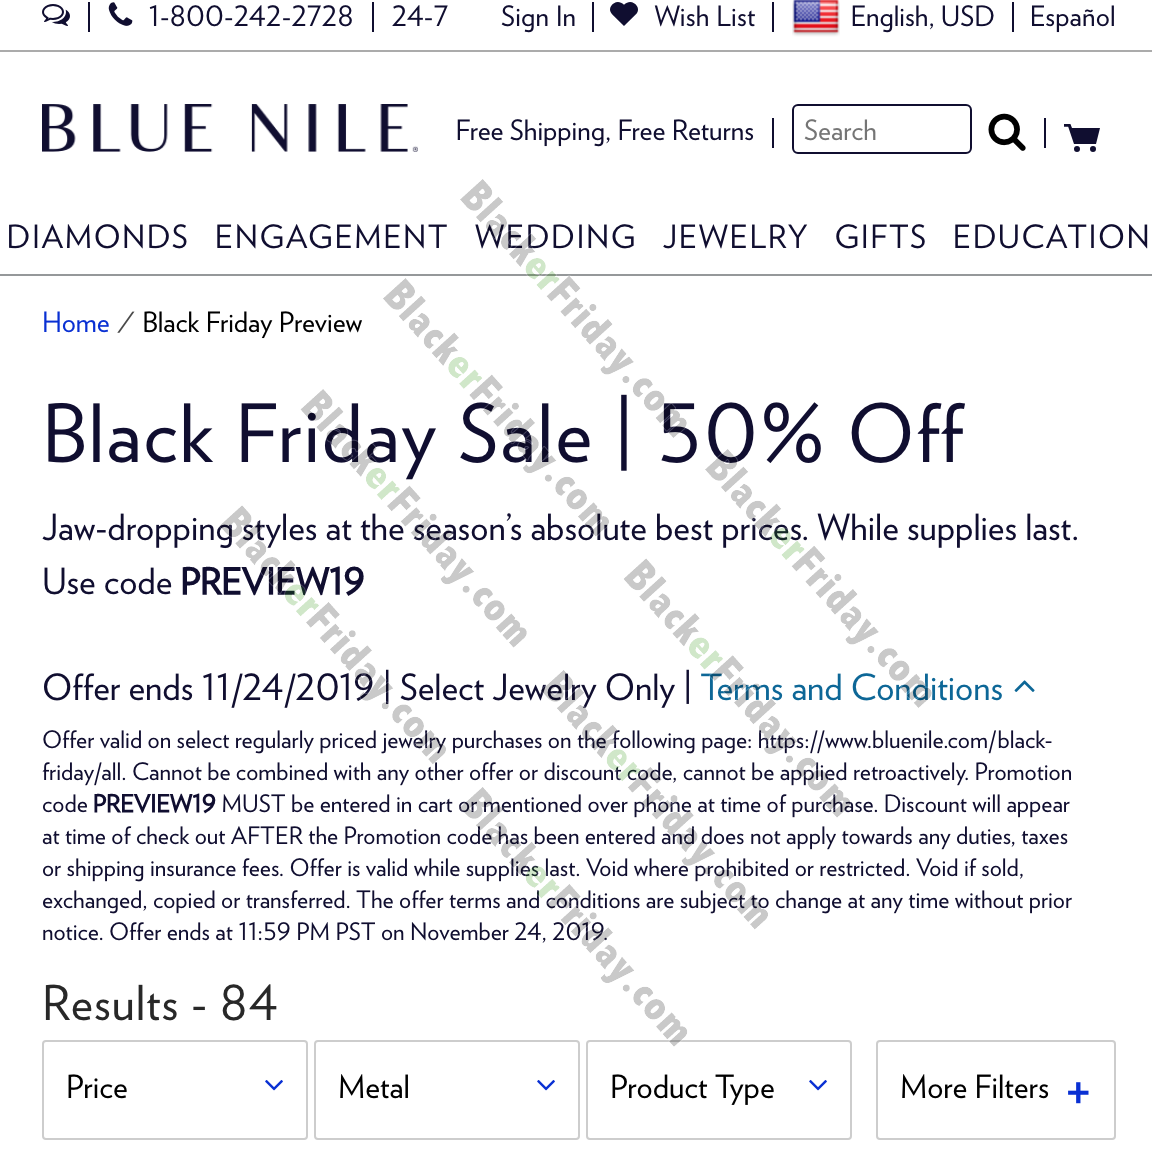 Blue Nile Black Friday 2021 Sale - What to Expect - Blacker Friday